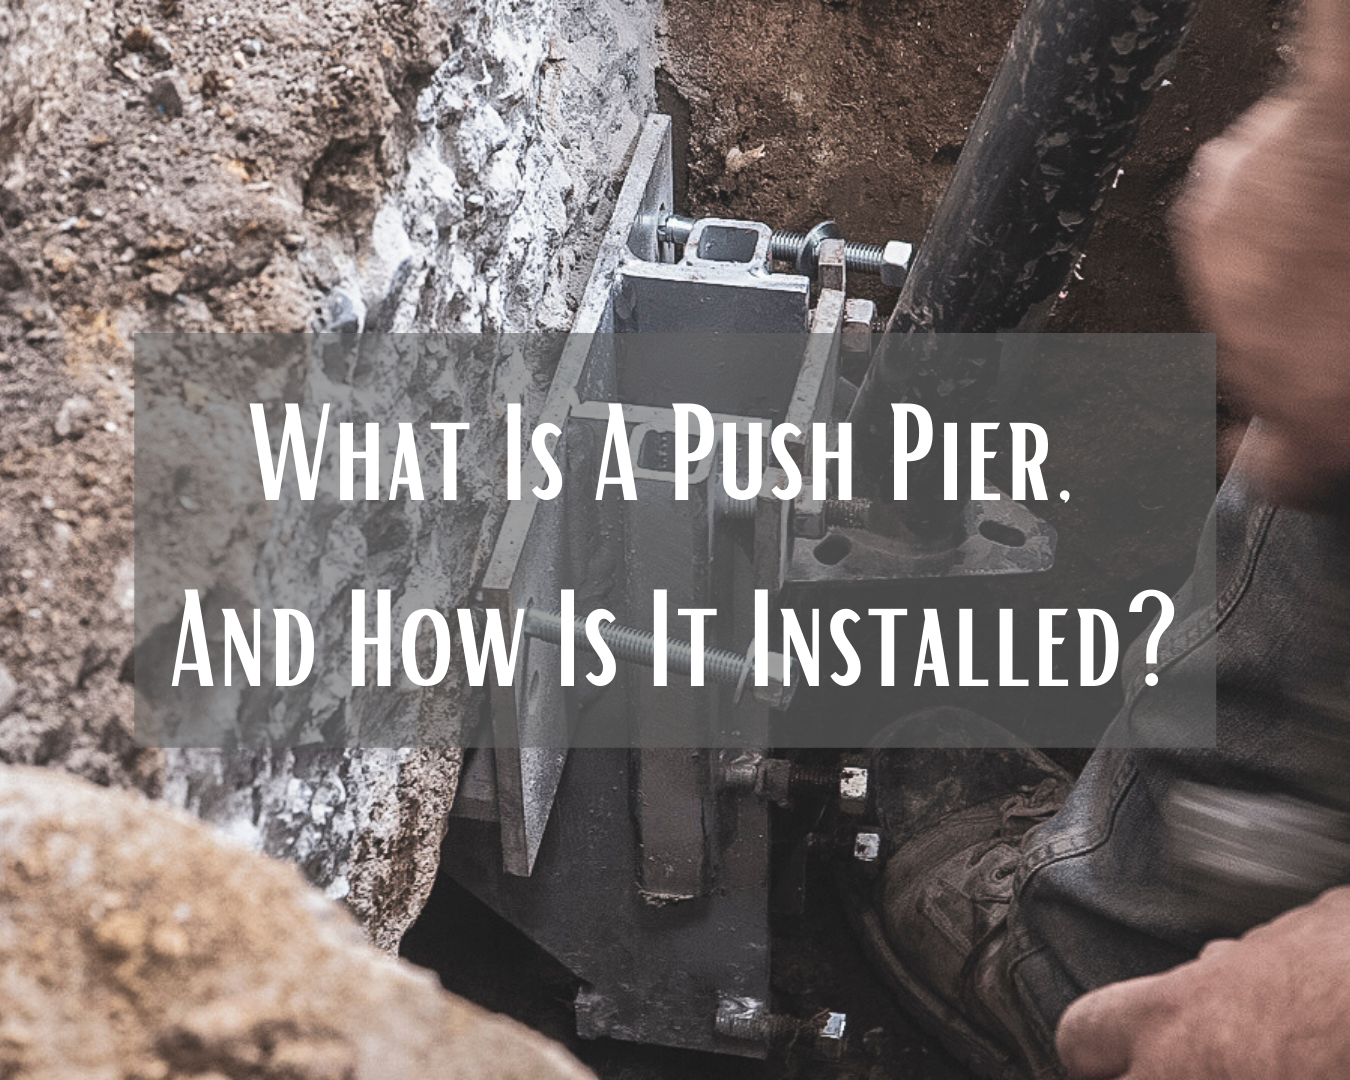 What Is A Push Pier, And How Is It Installed?